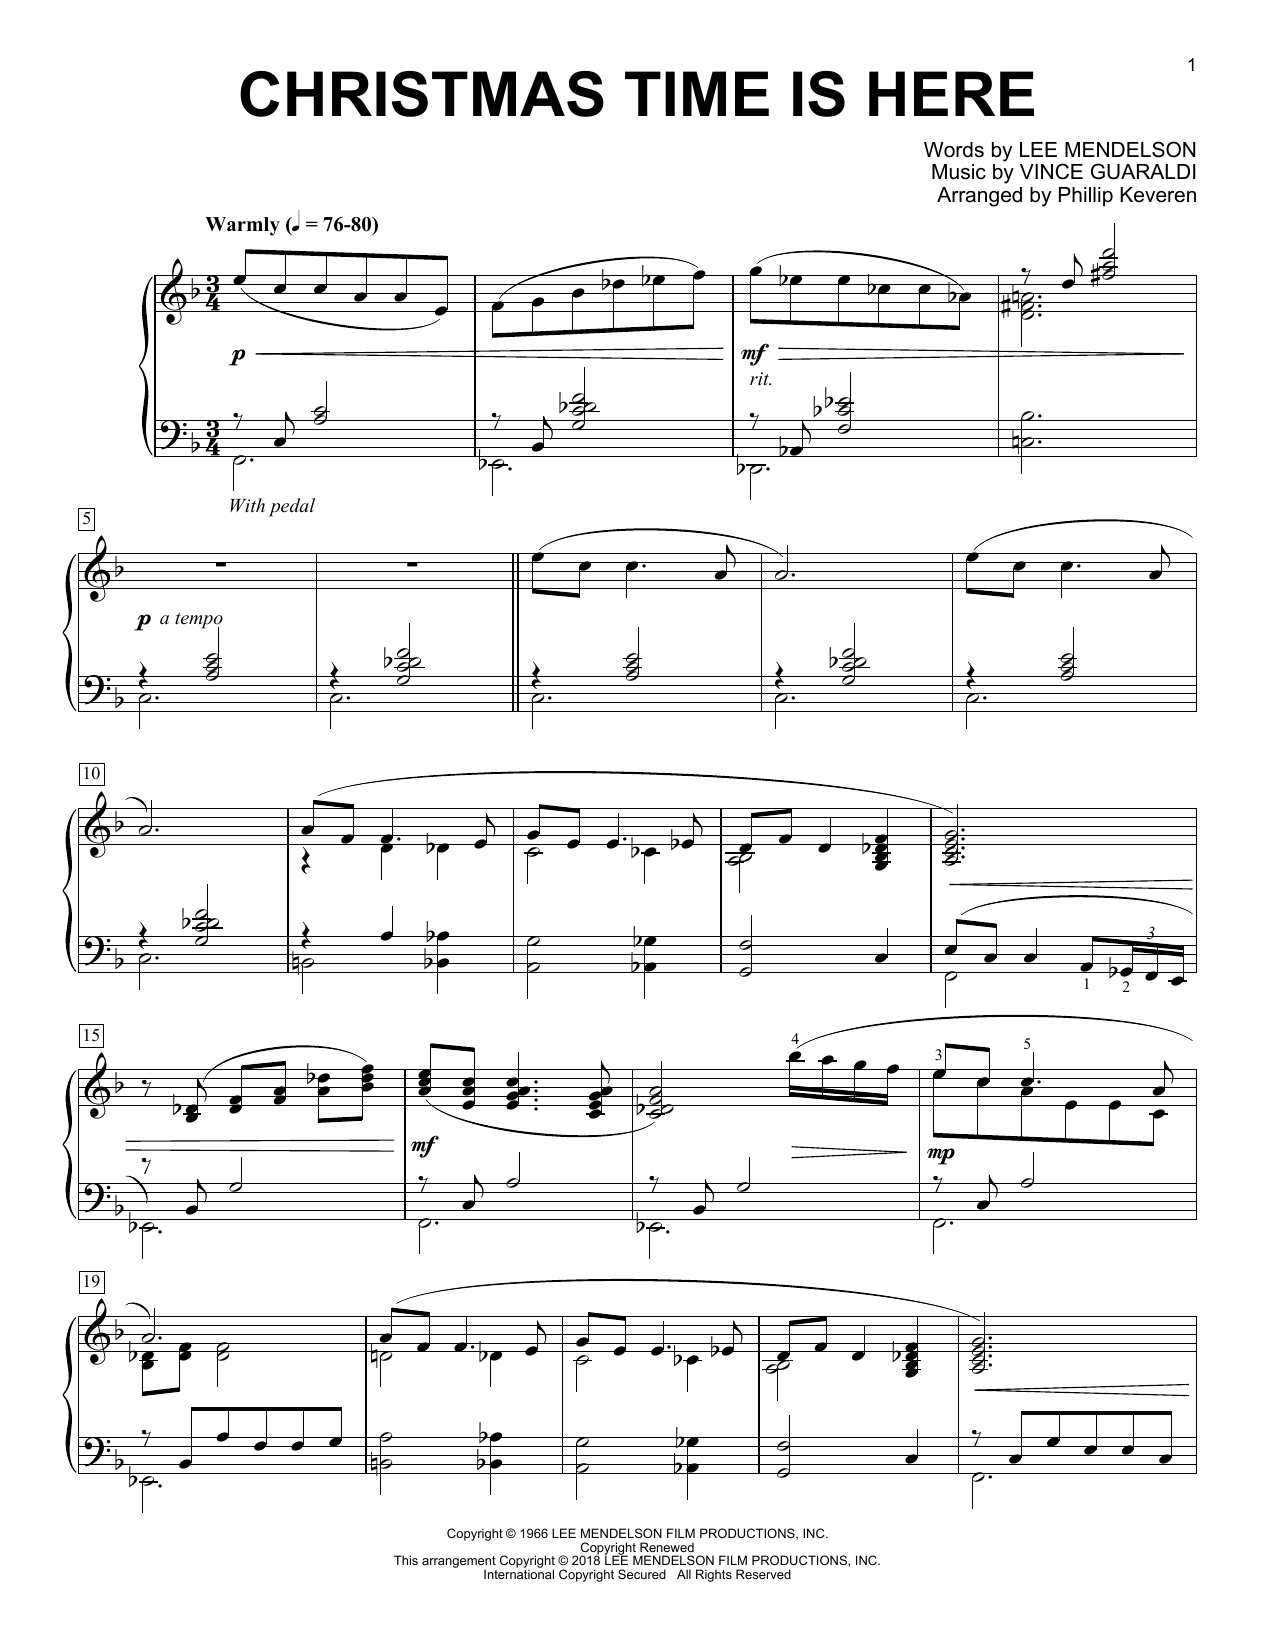 Download Phillip Keveren Christmas Time Is Here Sheet Music